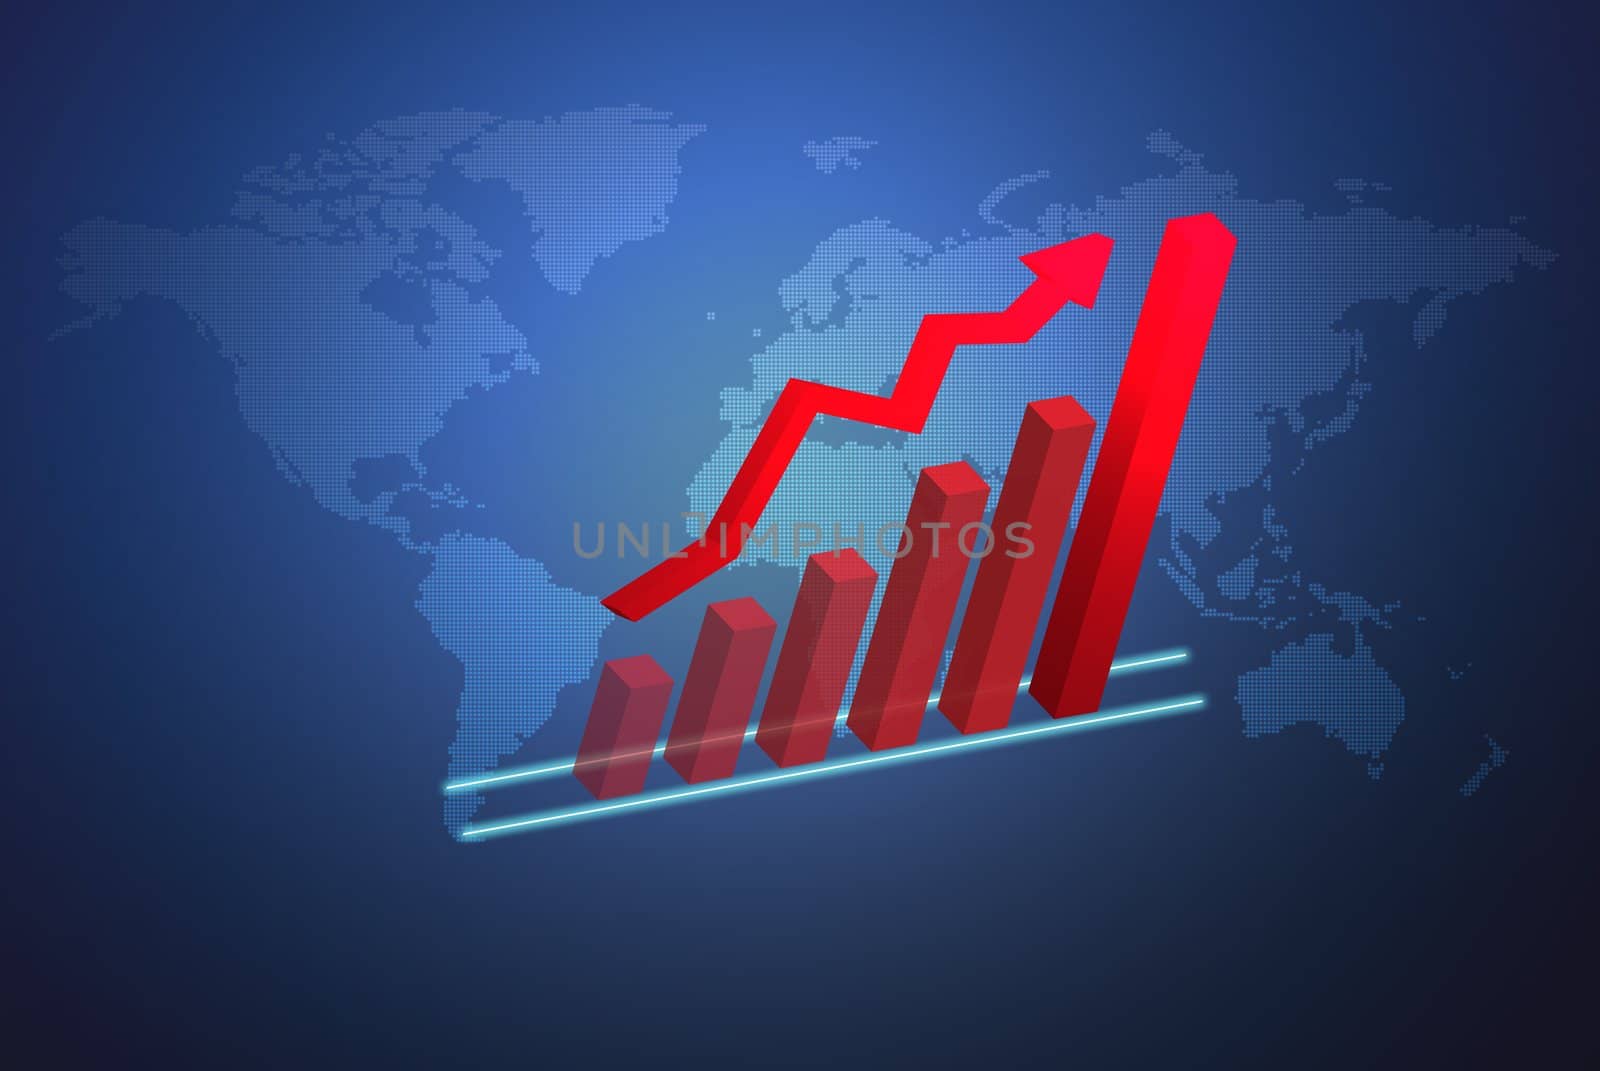 The global economy business concept with 3D growth chart by sasilsolutions